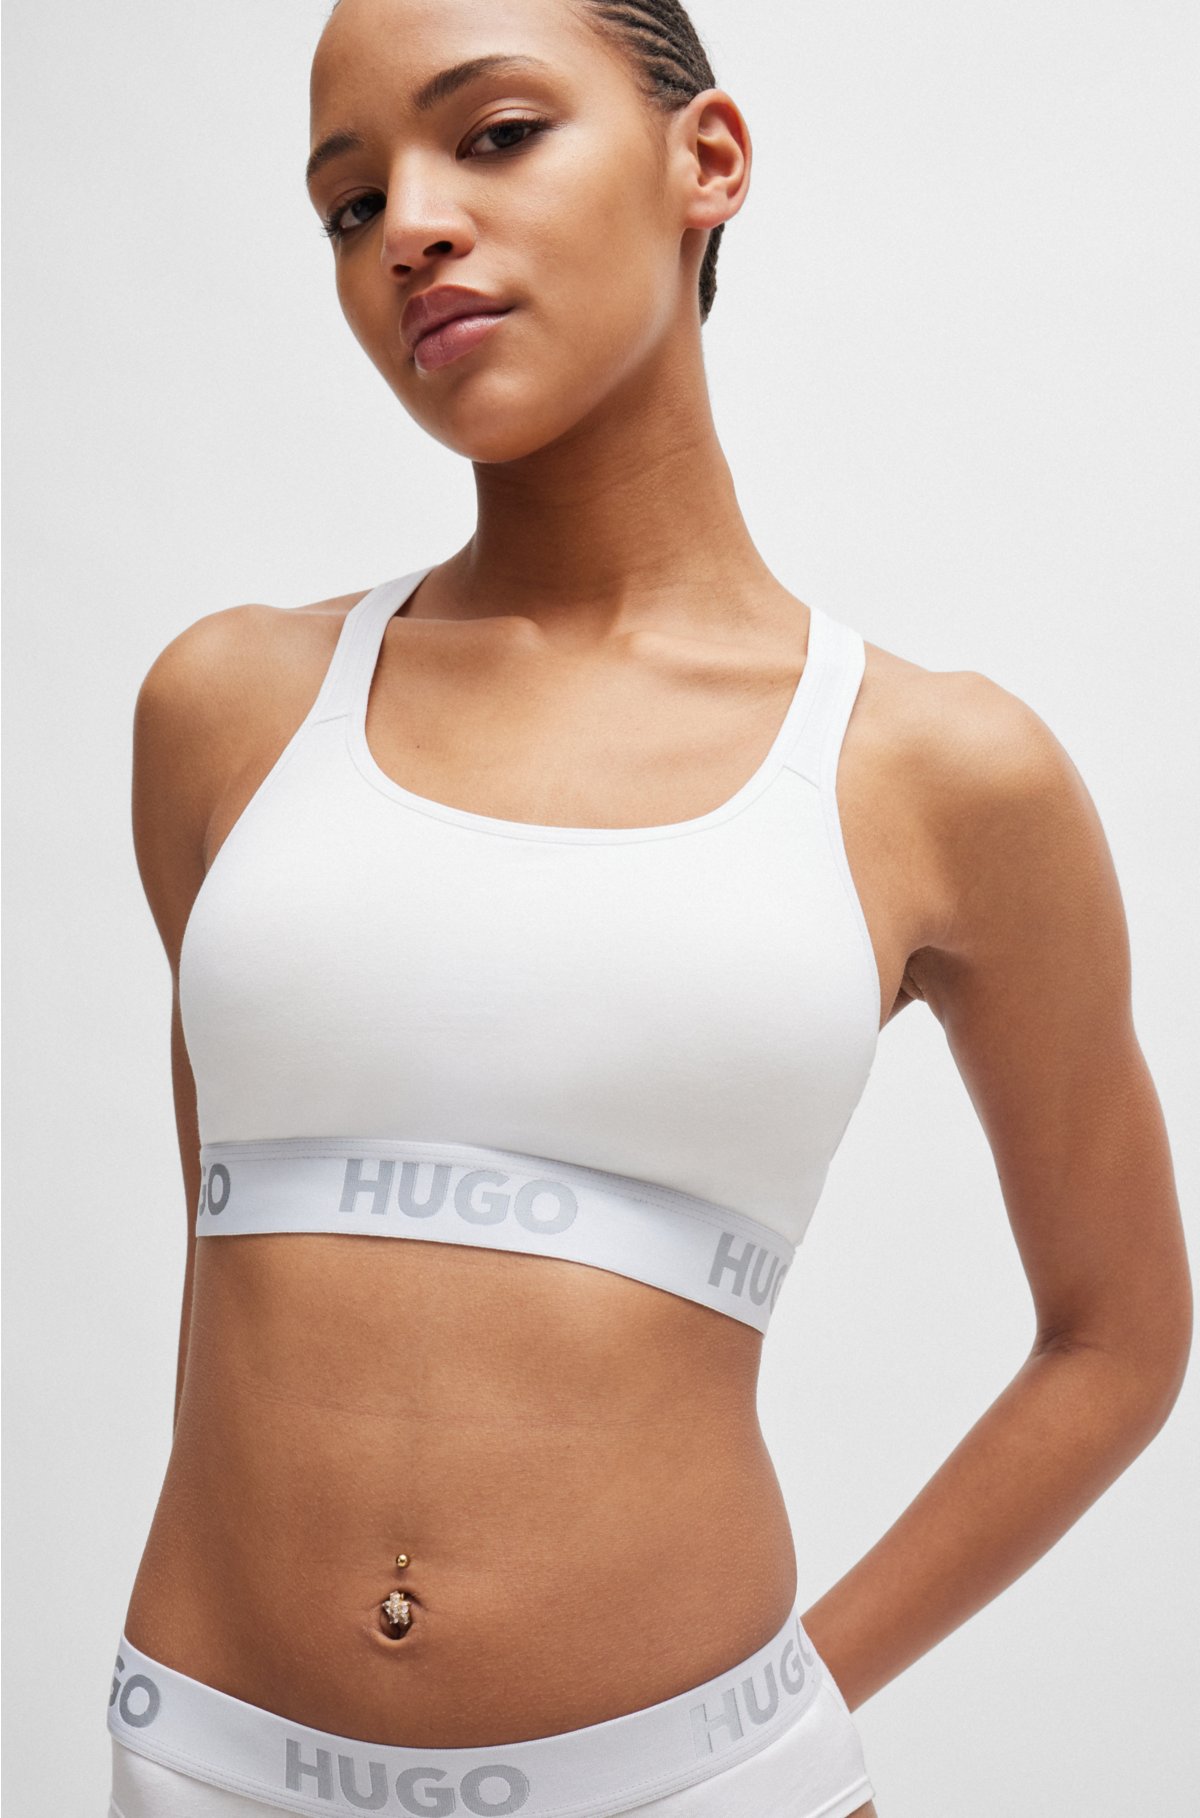 HUGO - Sports bra in logos cotton with repeat stretch